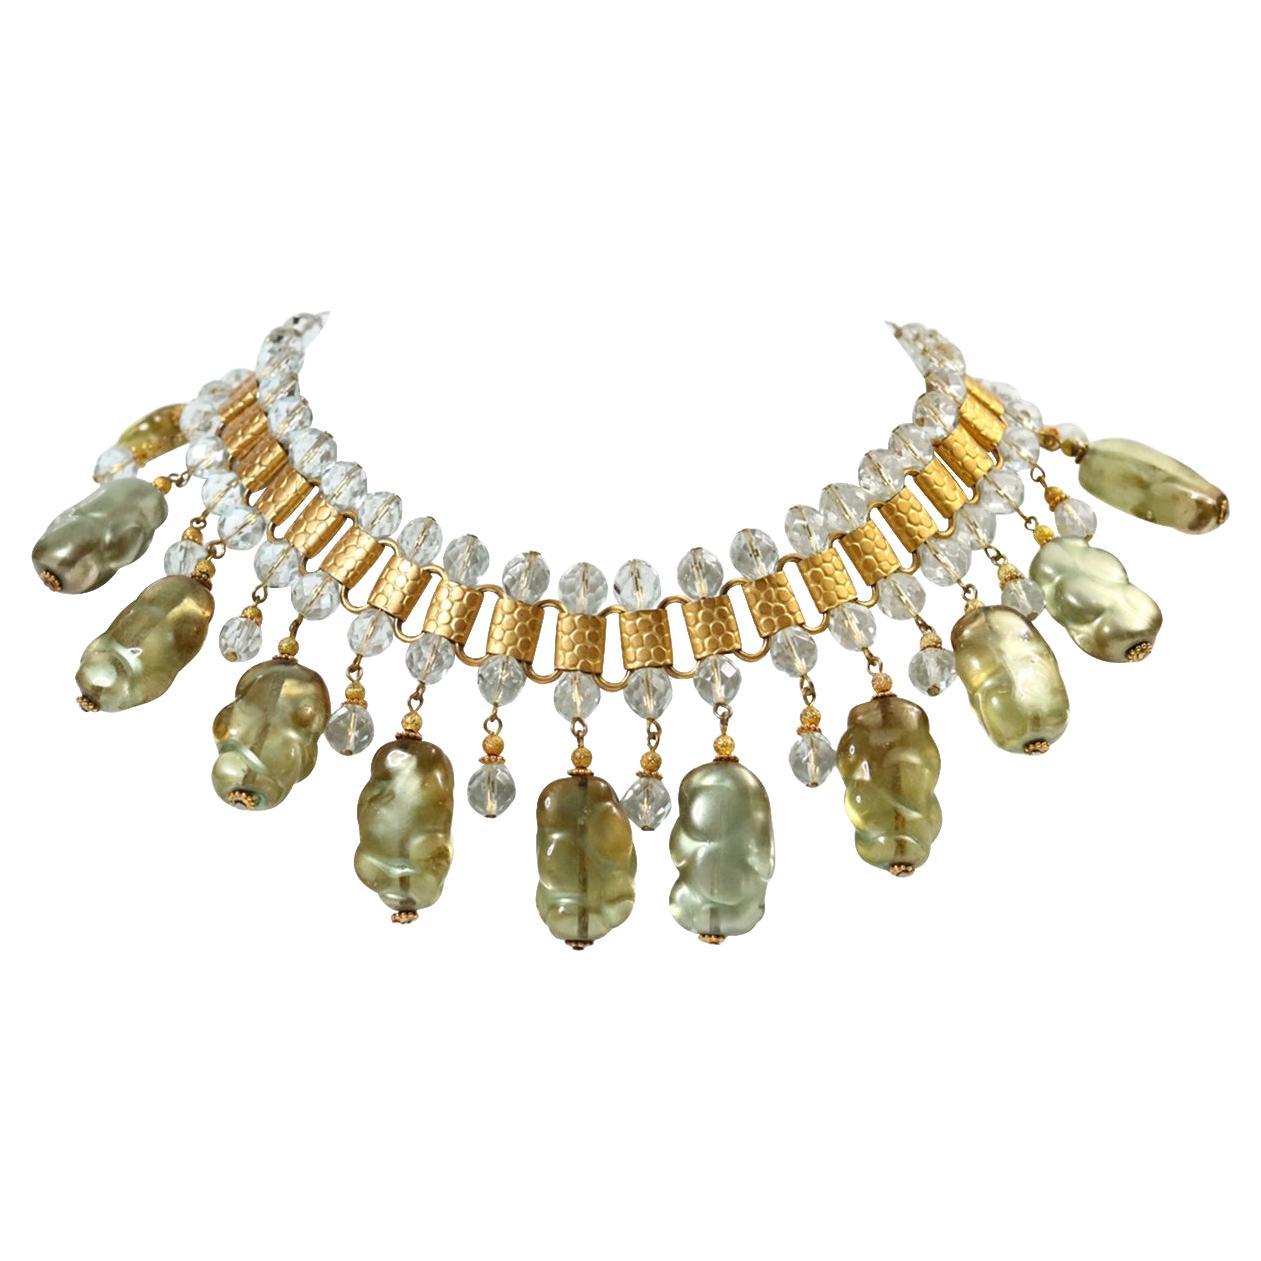 Vintage deLillo Gold Tone with Light Green Dangling Beads Necklace, circa 1970s For Sale